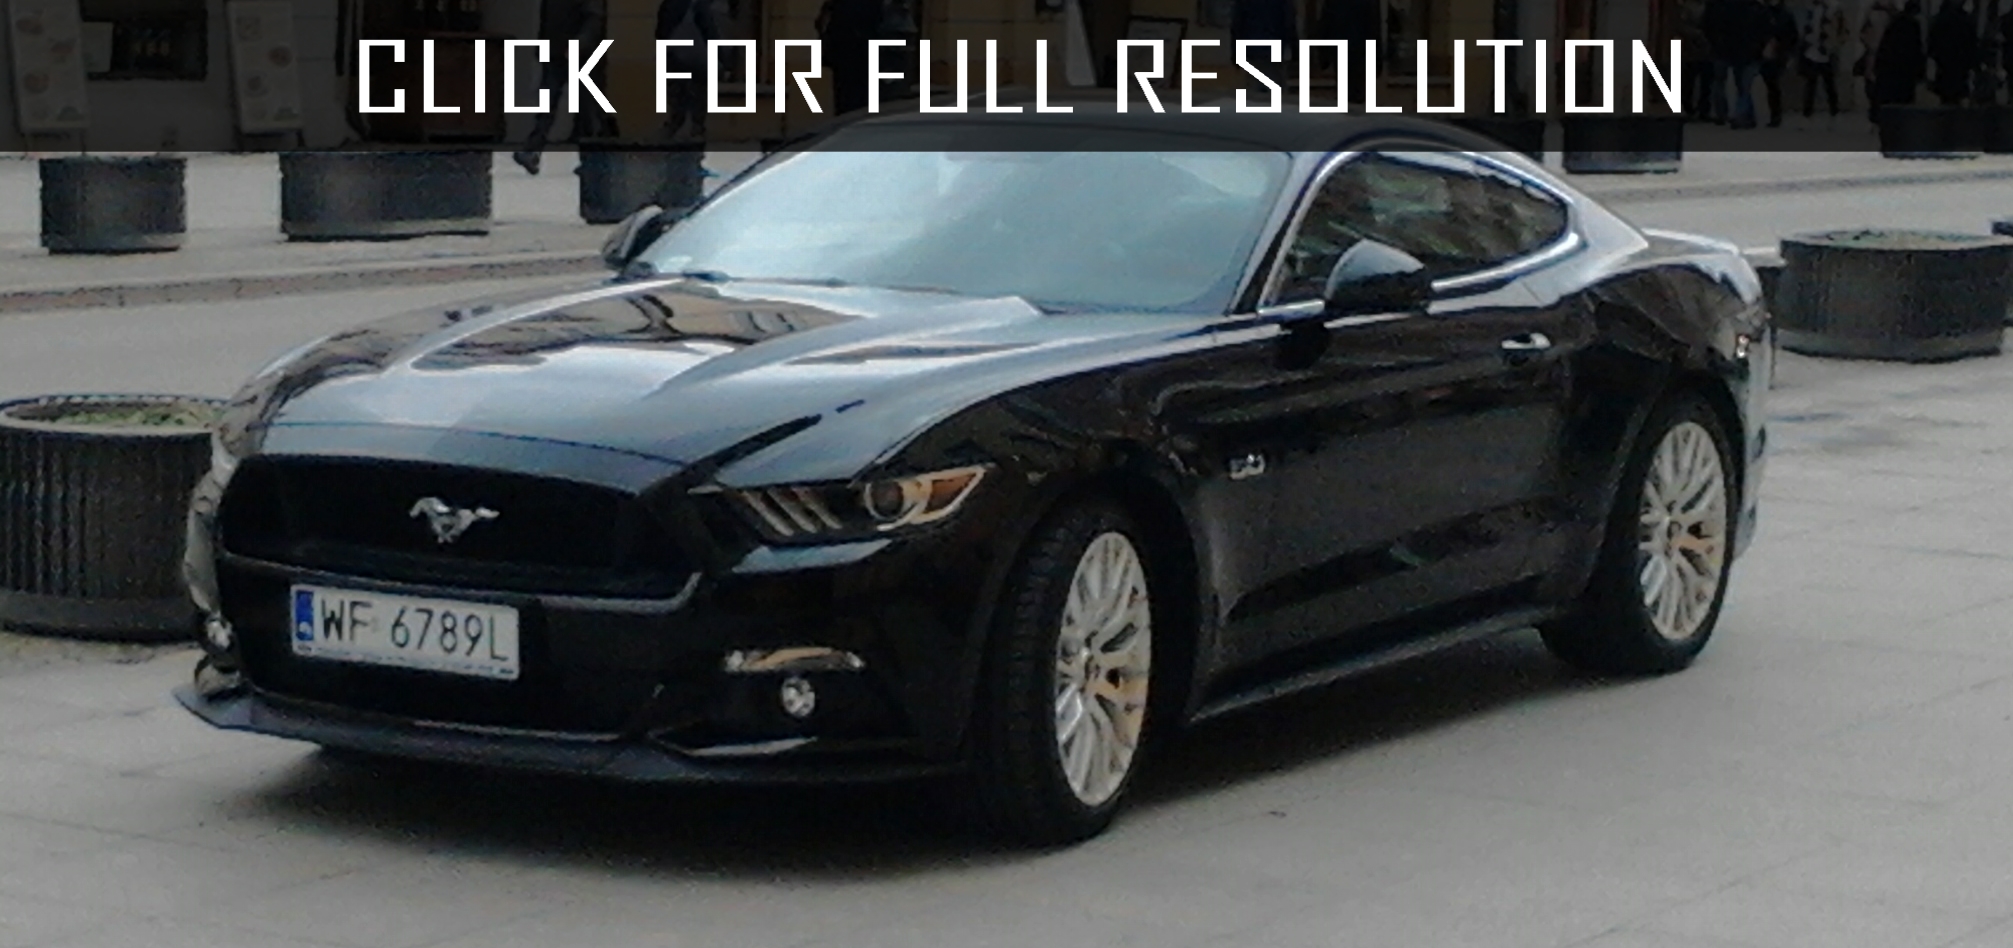 Ford Mustang Black